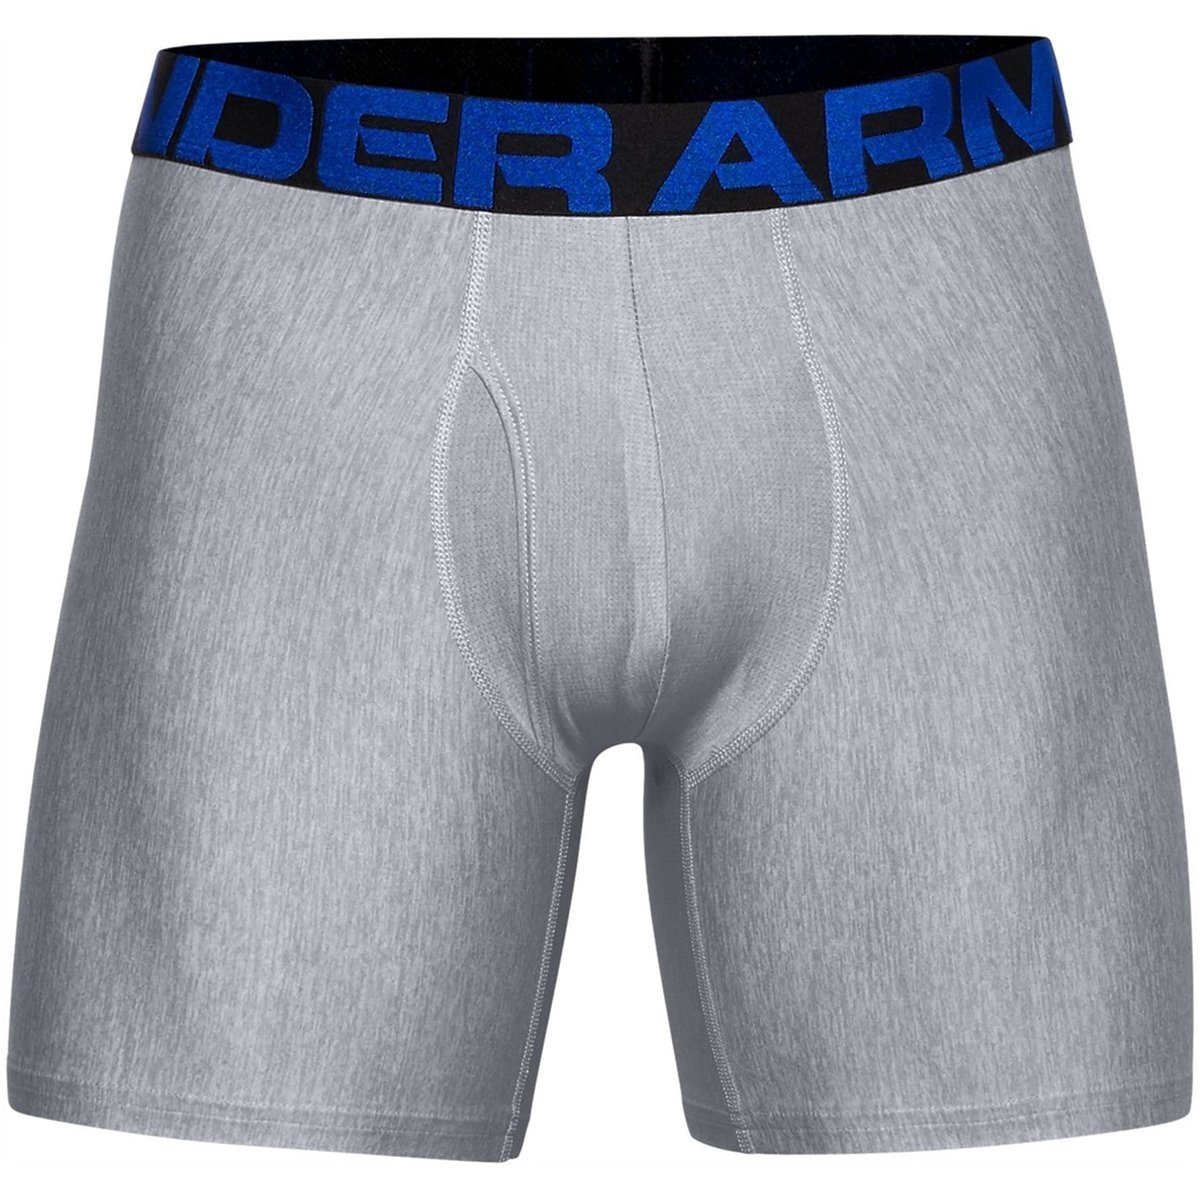 All Mens Under Armour